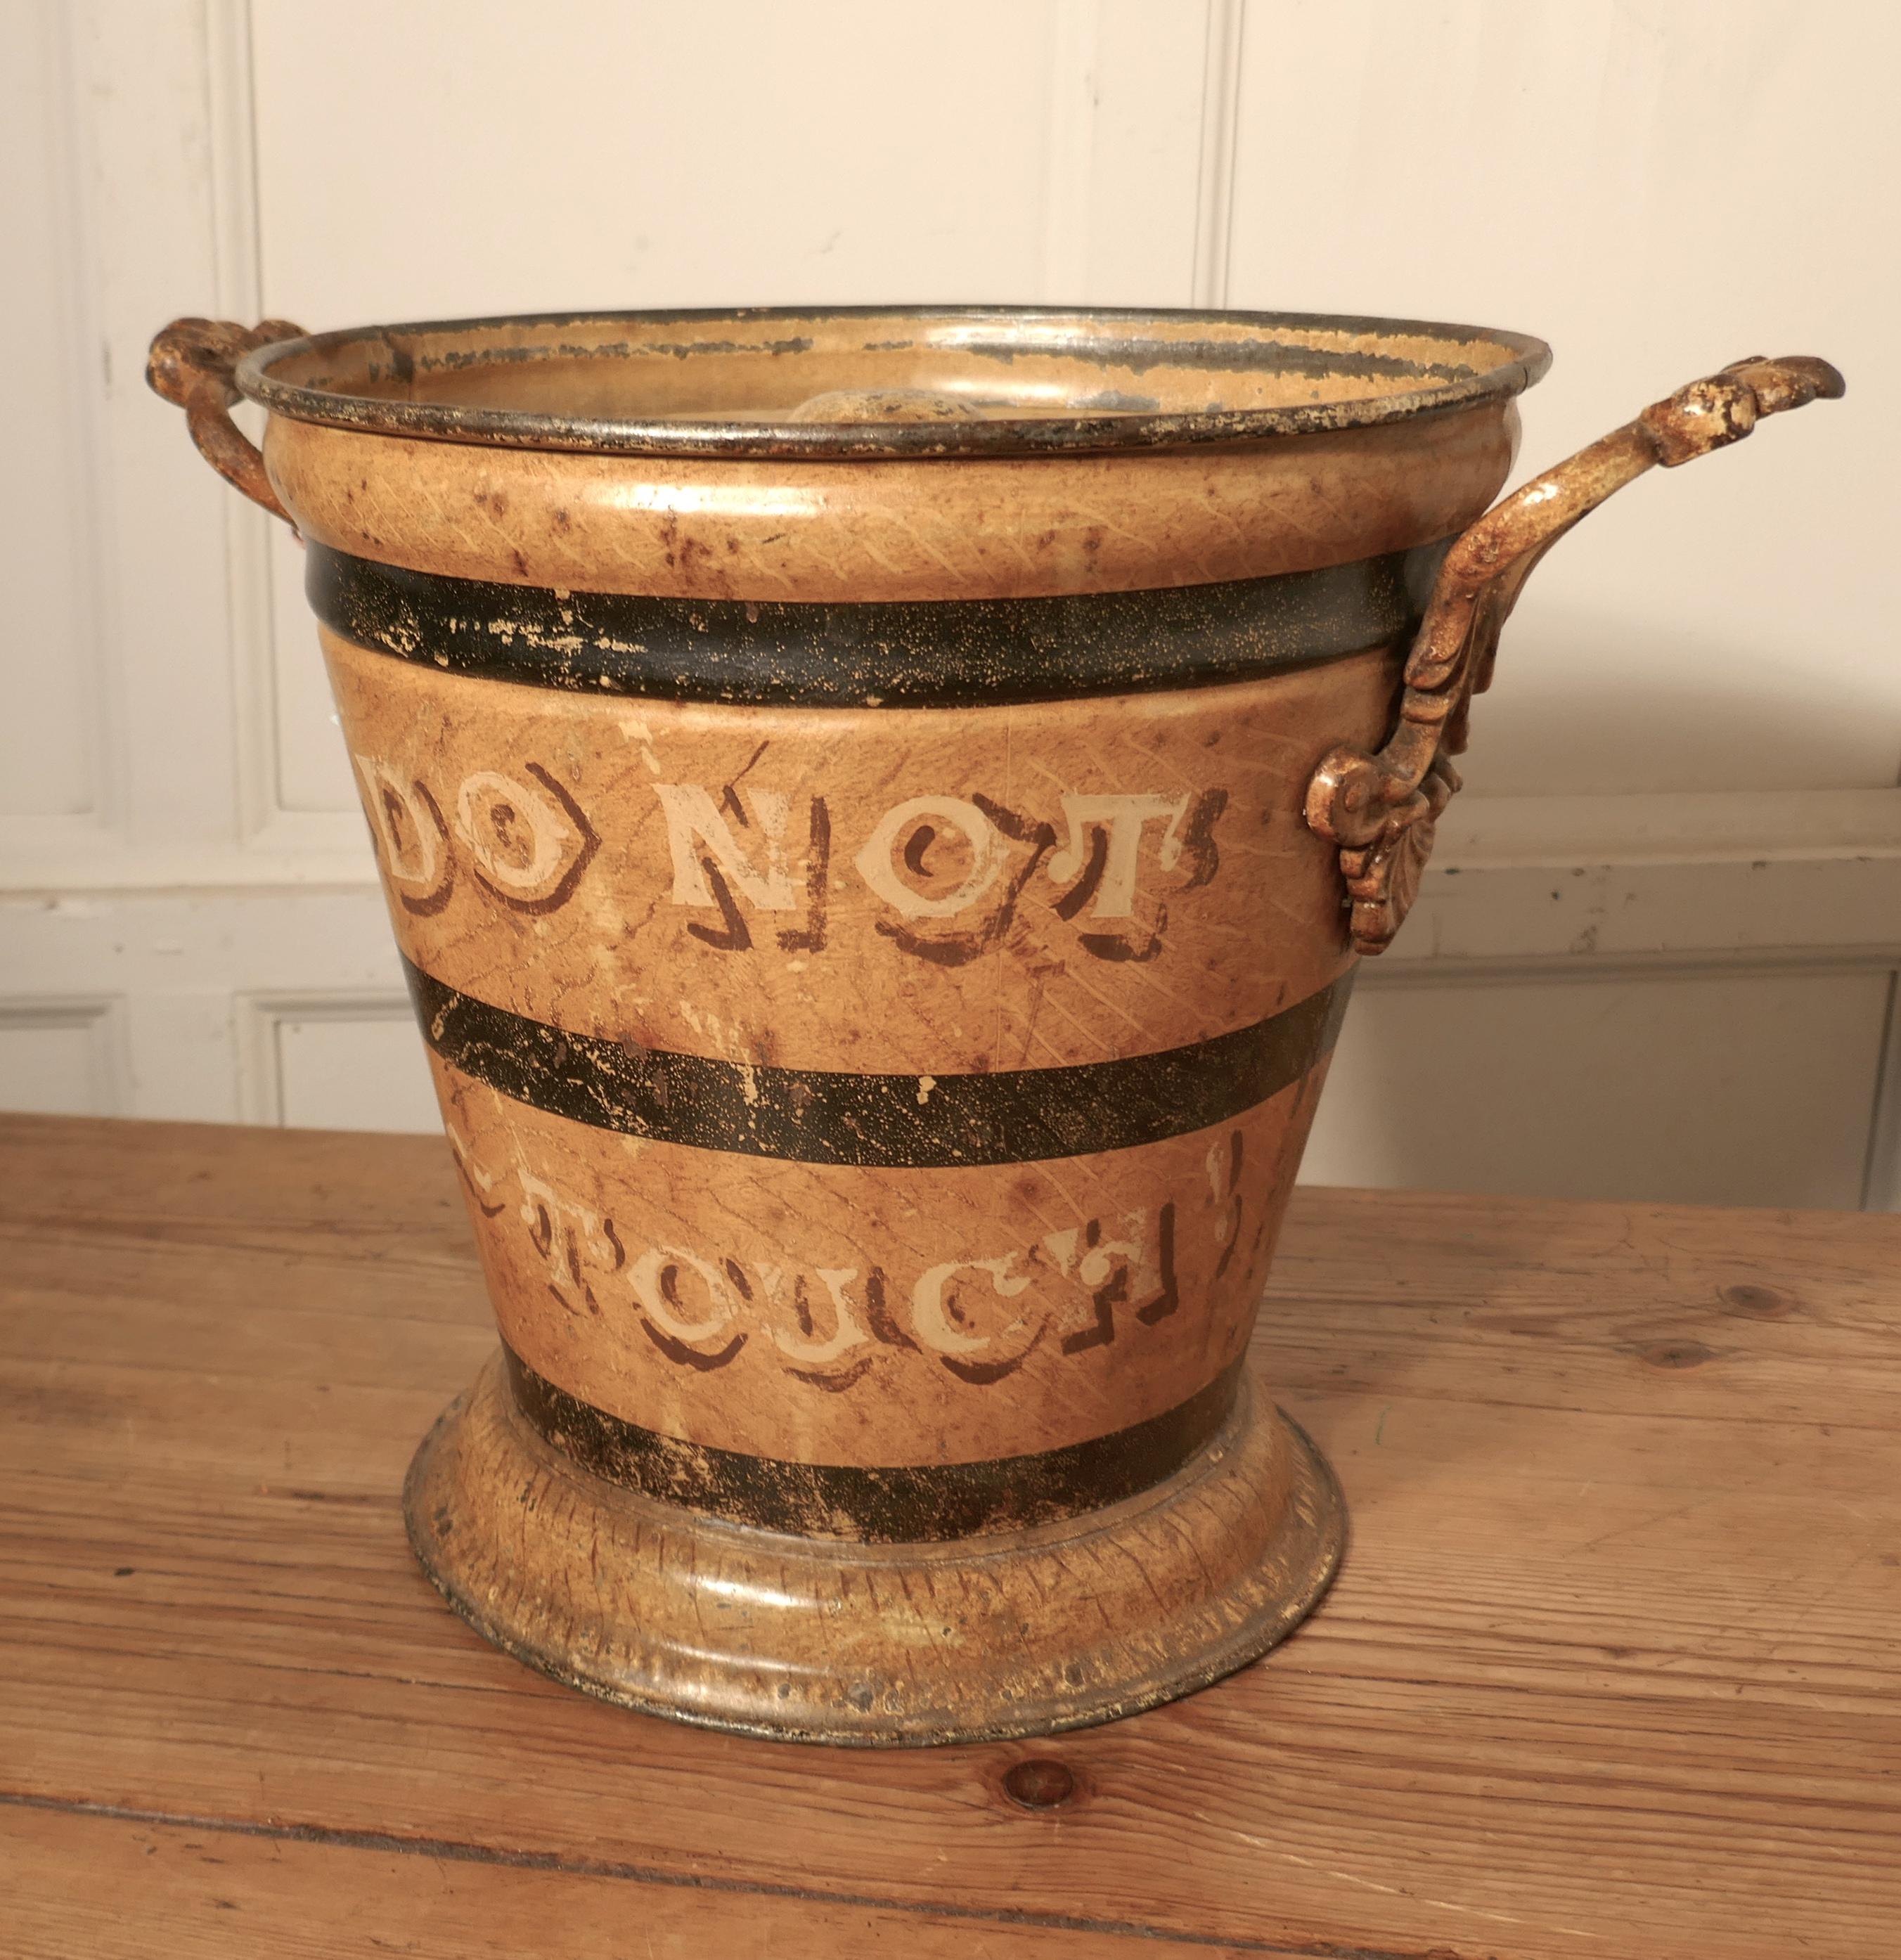 Victorian painted tin ash can or cinder bucket

A great looking piece, it is in scumble paint with “DO NOT TOUCH” on one side and “CINDERS AND HOT ASHES” on the reverse, all a bit worn but to be expected on such an old piece
The bucket has a